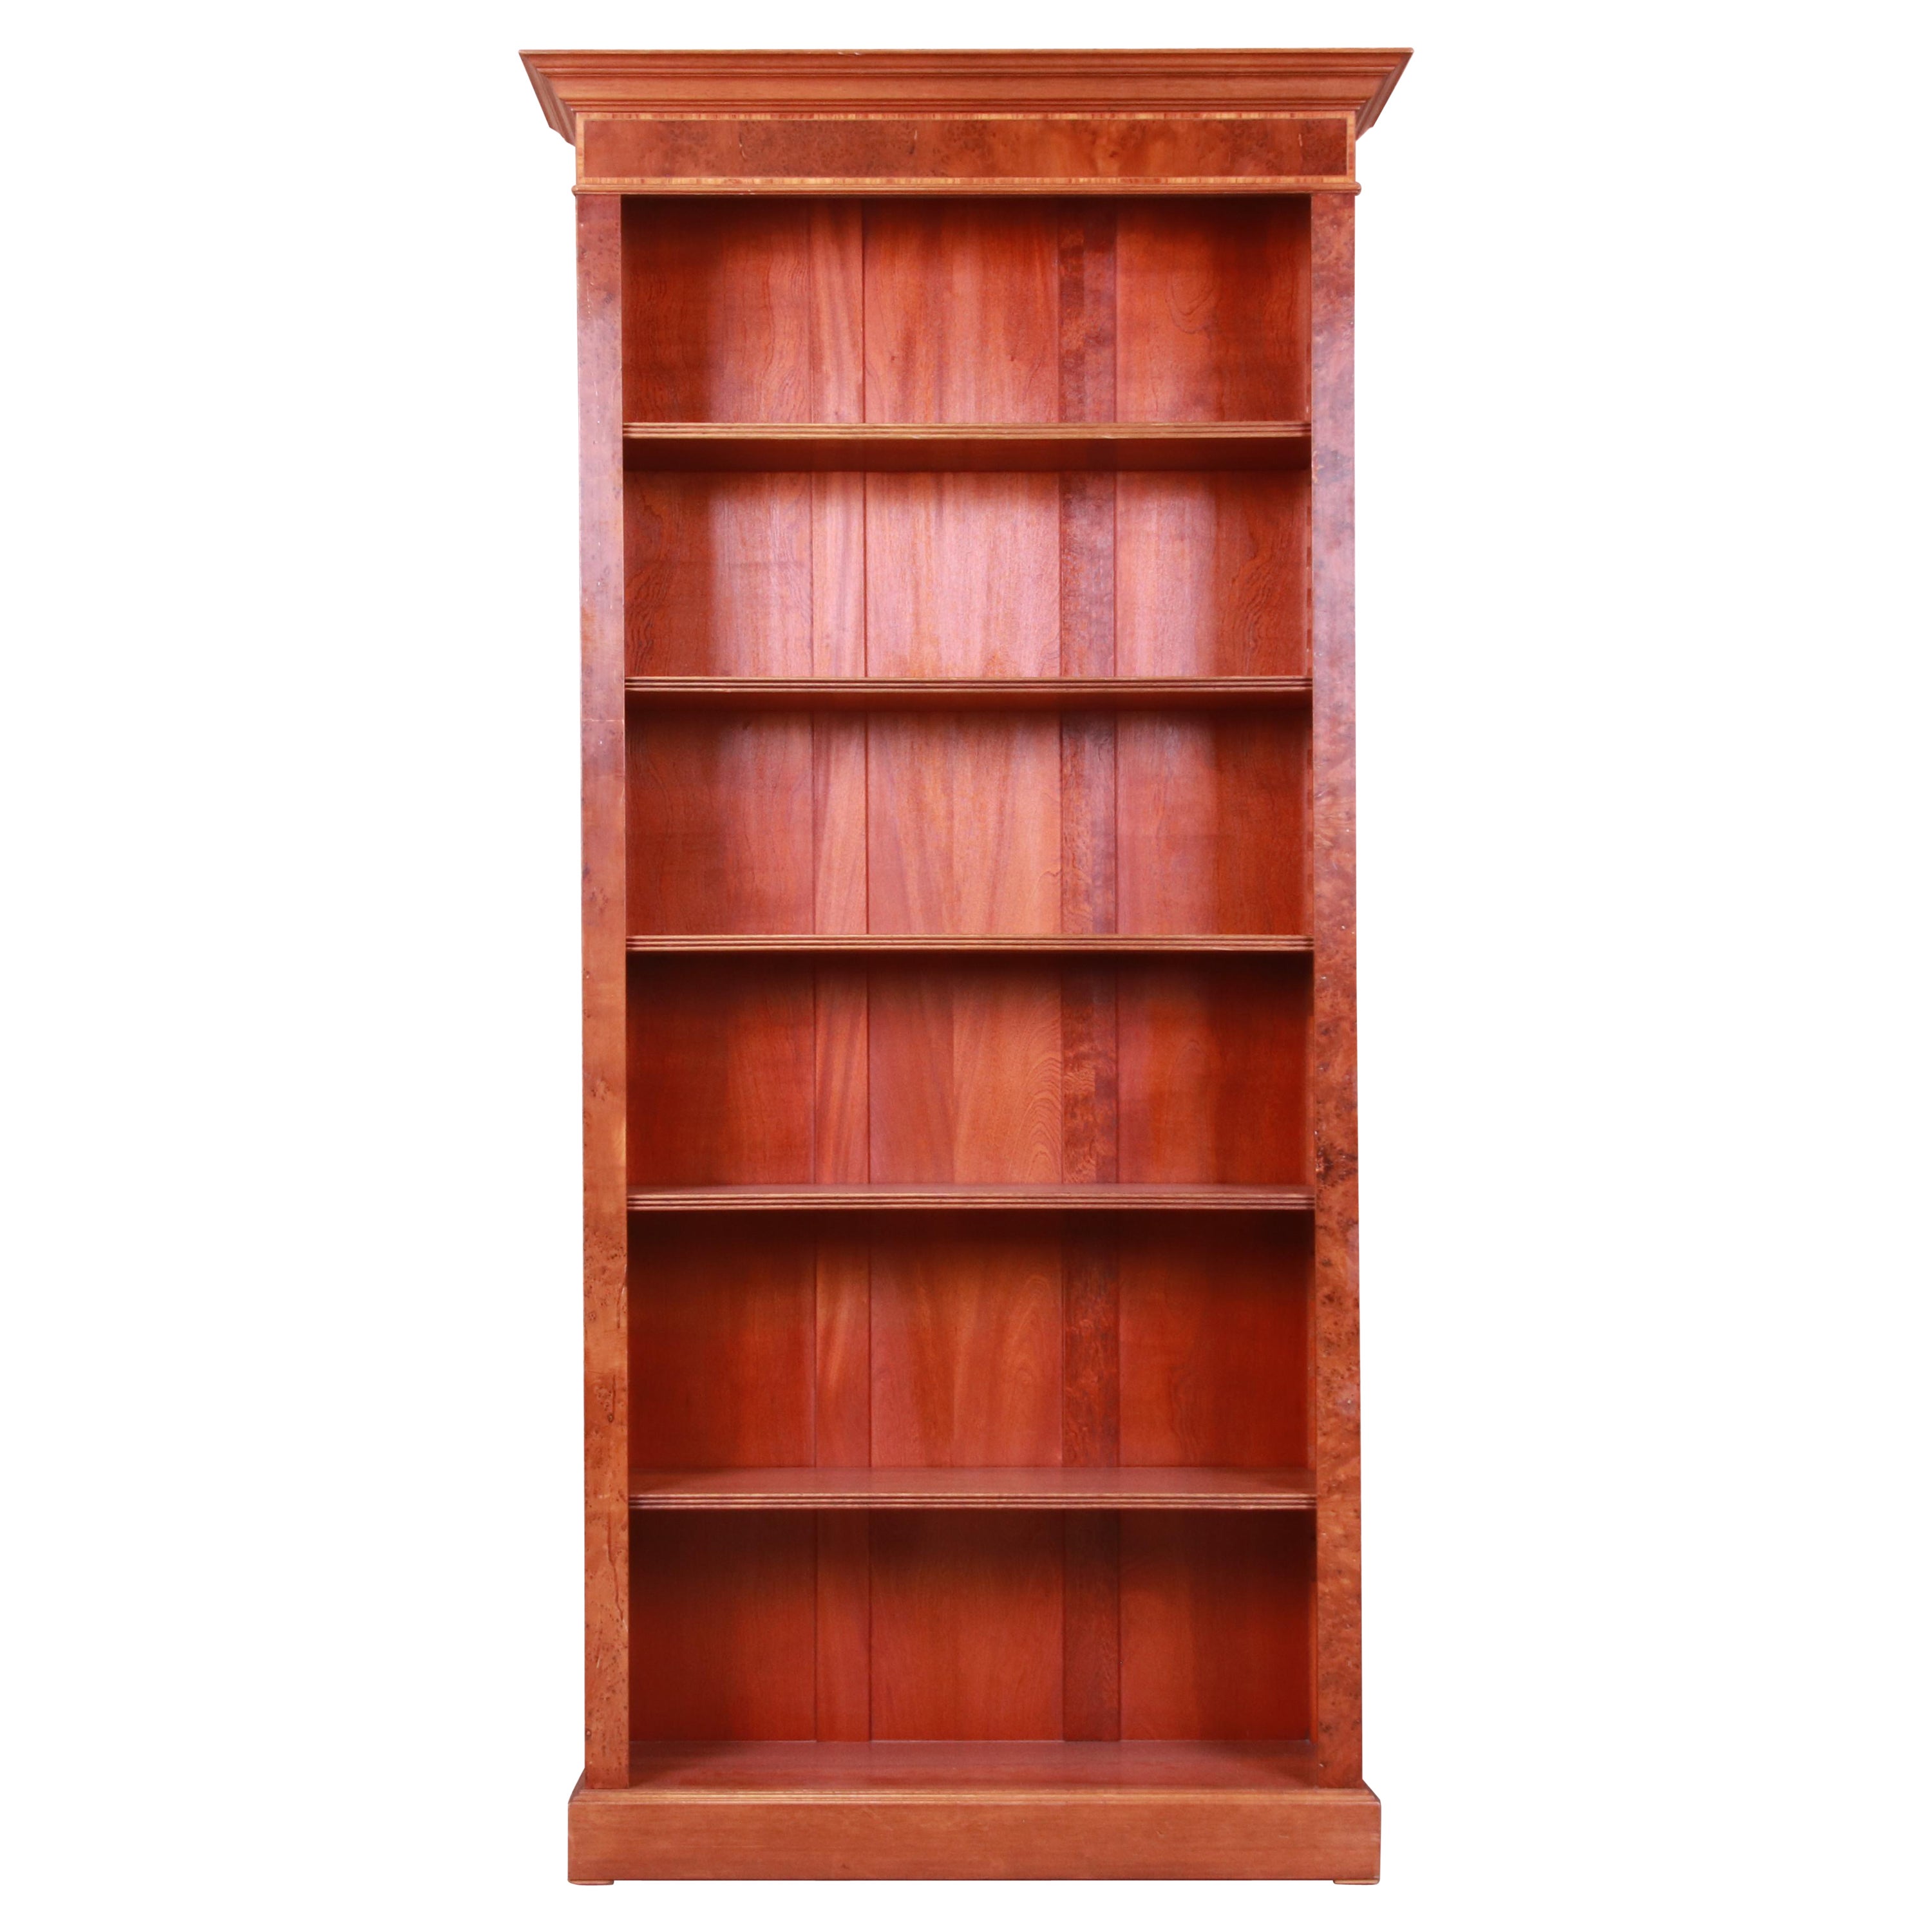 Victorian Style Burled Walnut and English Yew Wood Tall Bookcase